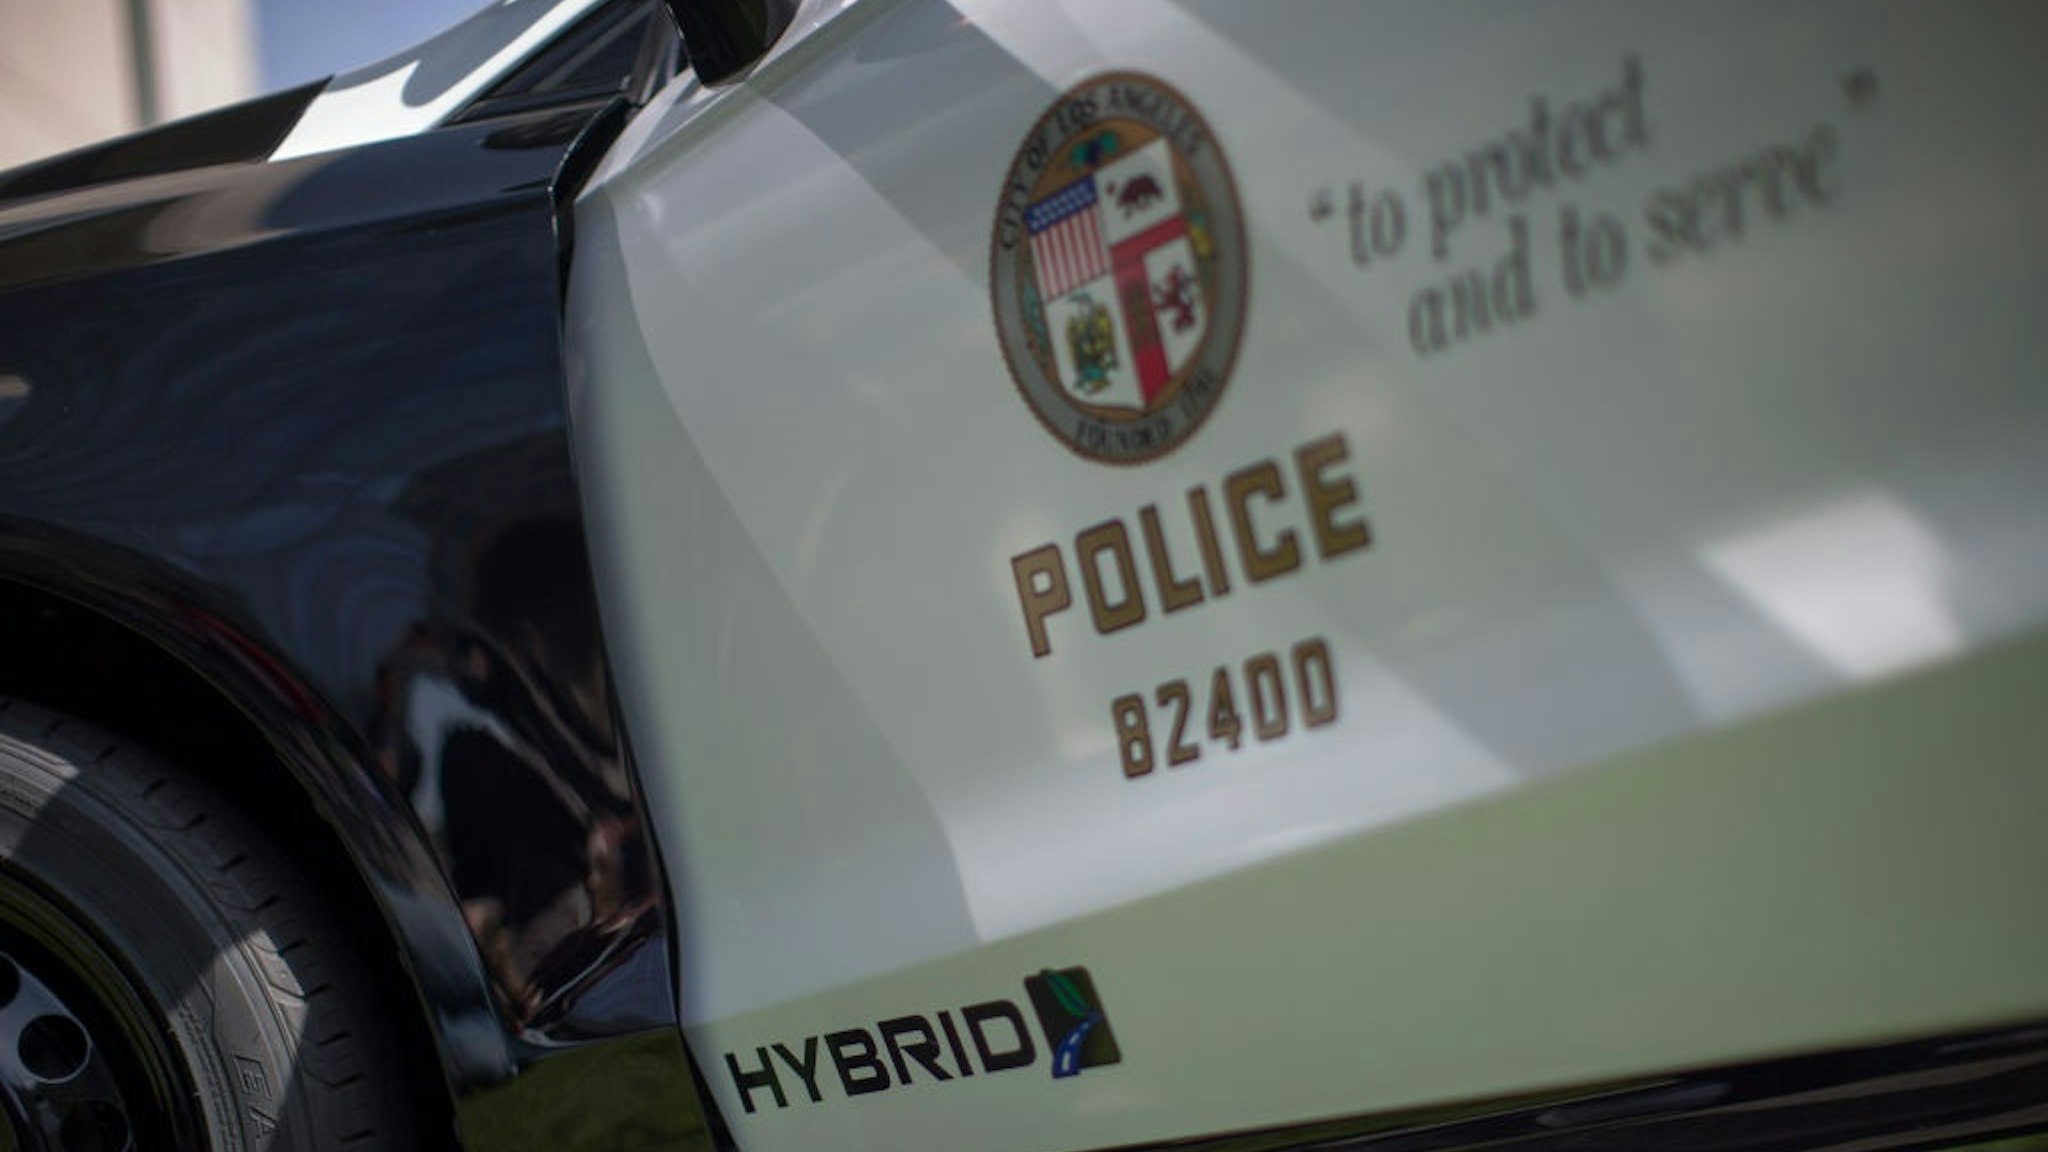 LOS ANGELES, CA - APRIL 10: A hybrid police car is seen at the unveiling of two new Ford Fusion hybrid pursuit-rated Police Responder cars at Los Angeles Police Department headquarters on April 10, 2017 in Los Angeles, California.